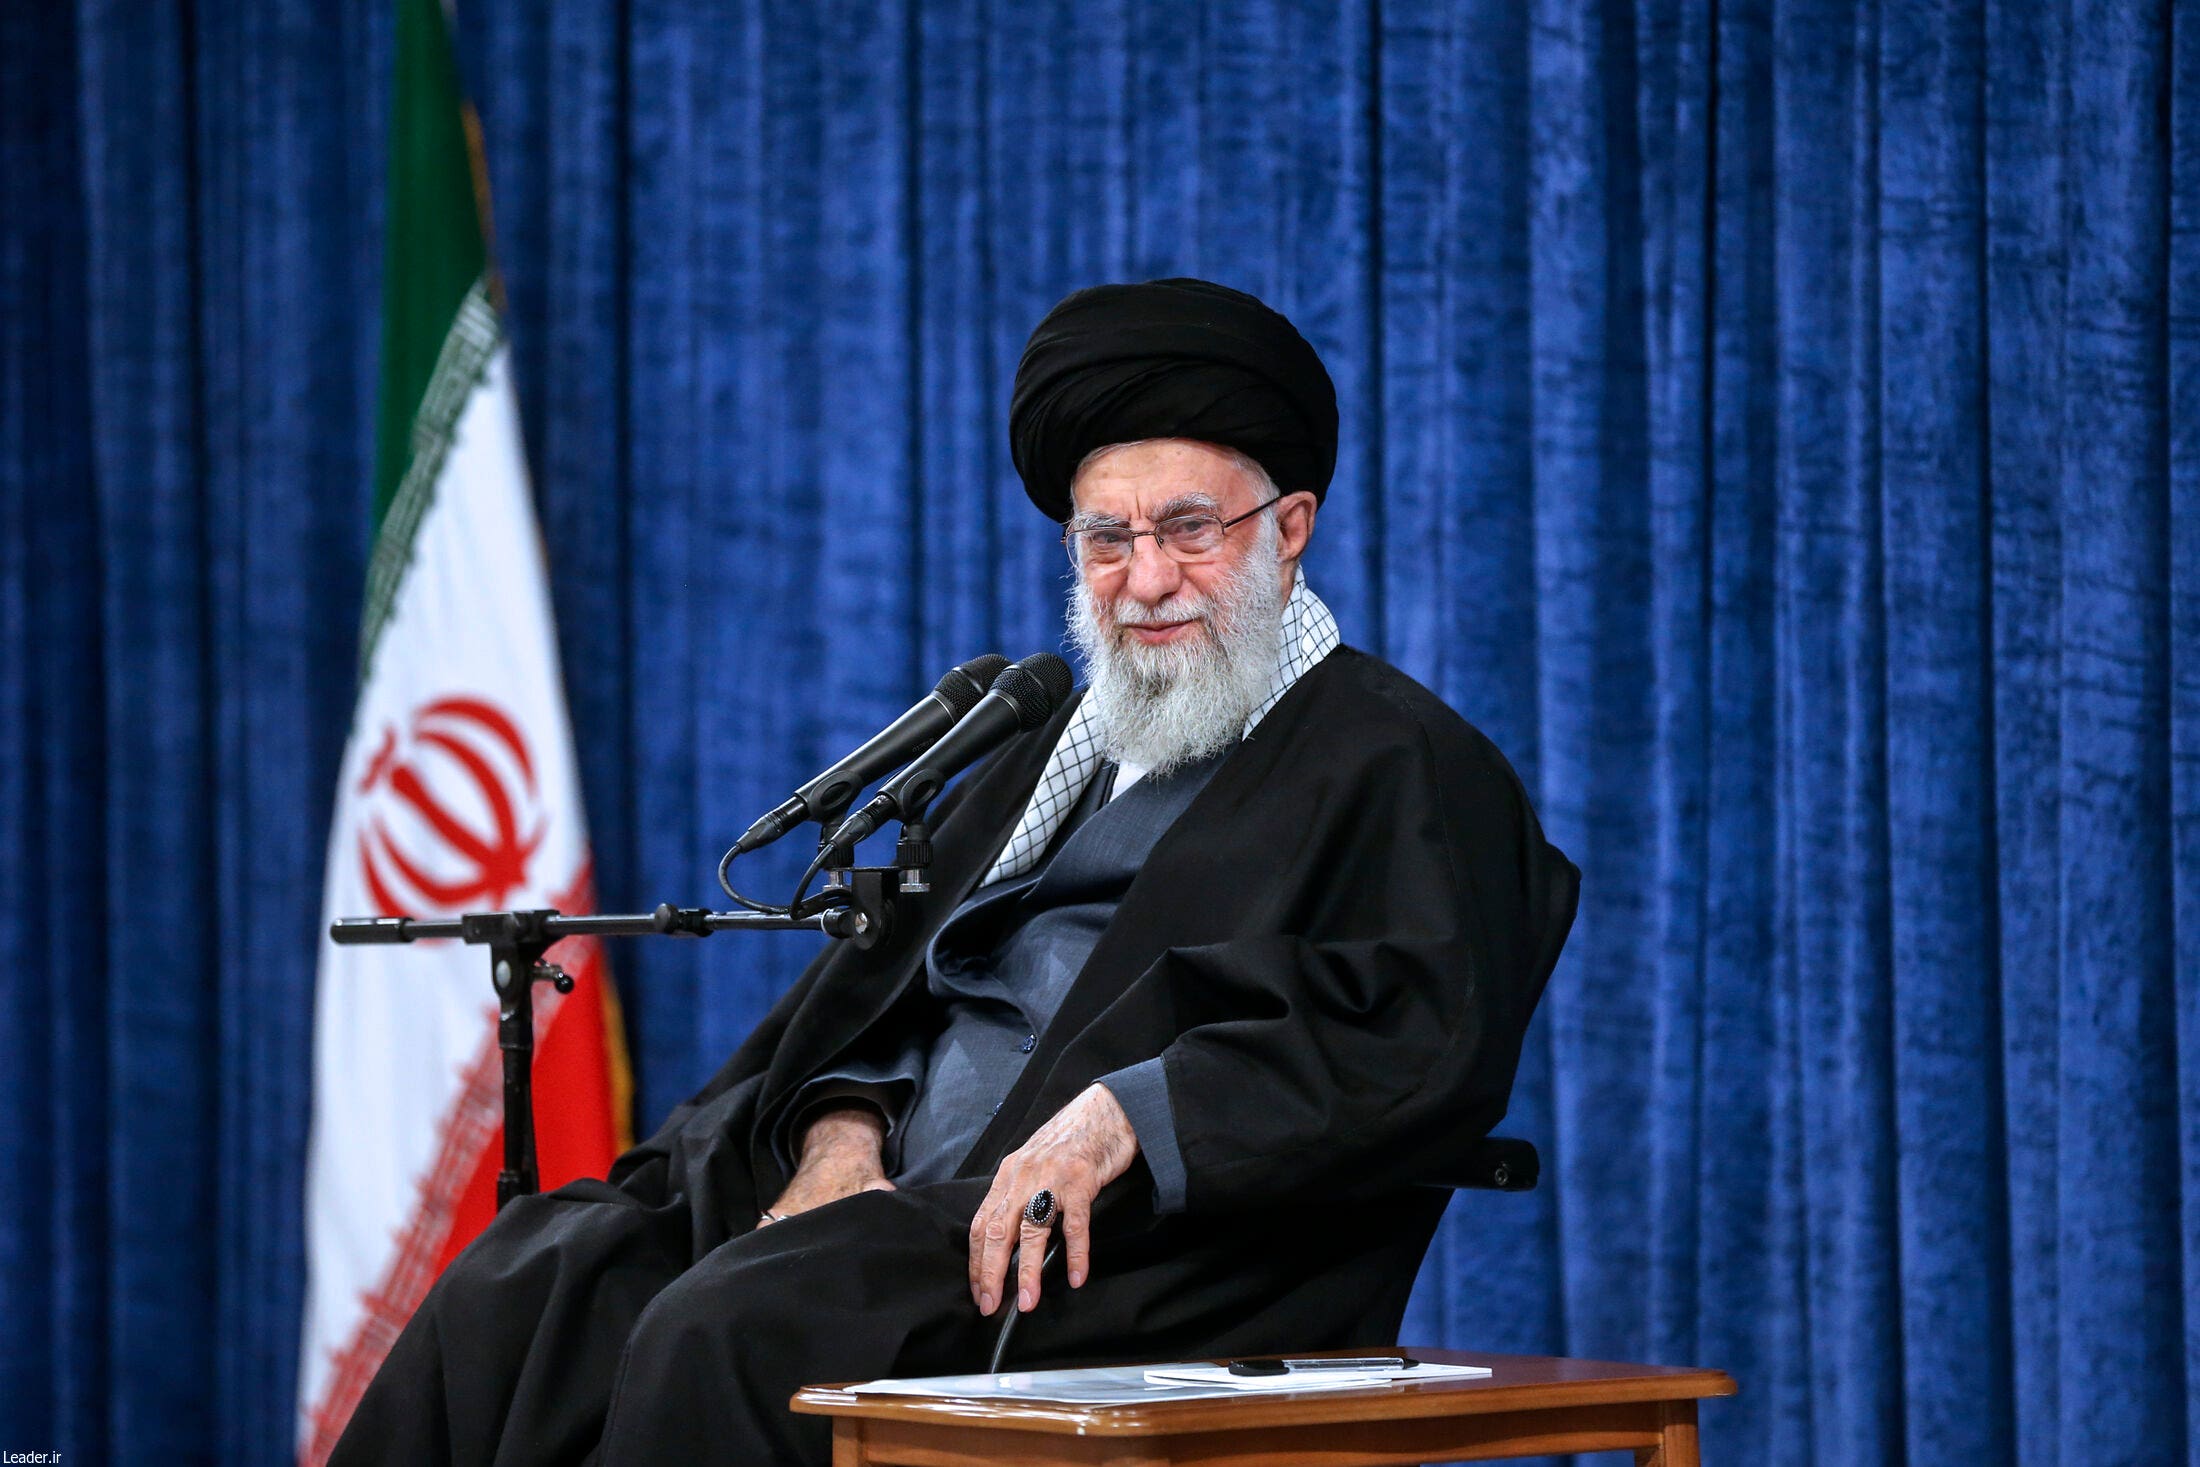 Iran’s Ayatollah Ali Khamenei has been the country’s second supreme leader since 1989